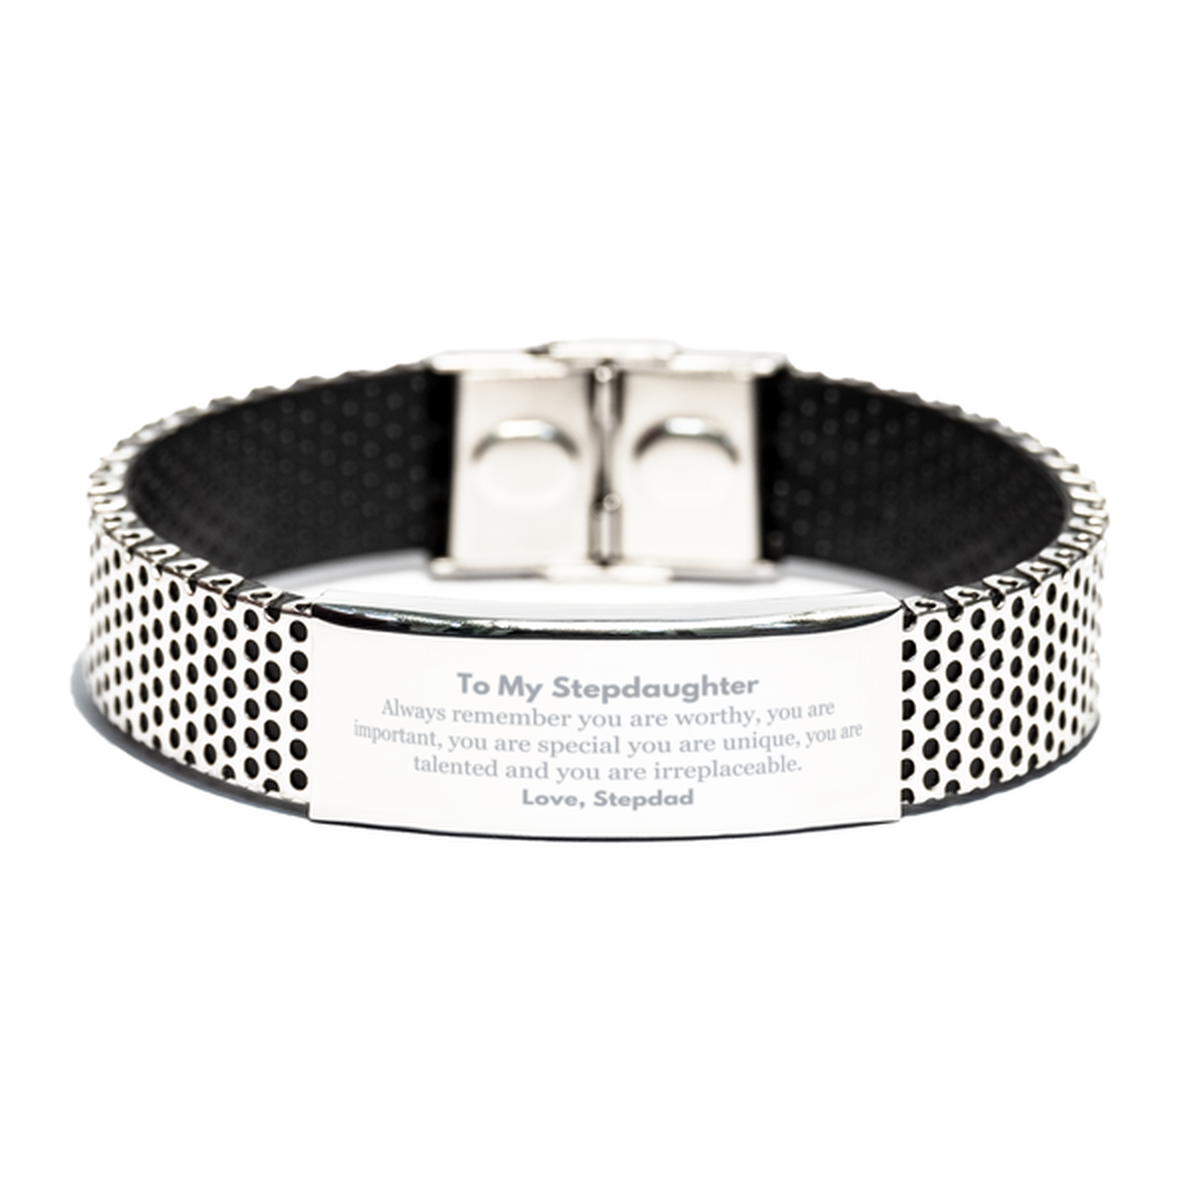 Stepdaughter Birthday Gifts from Stepdad, Inspirational Stainless Steel Bracelet for Stepdaughter Christmas Graduation Gifts for Stepdaughter Always remember you are worthy, you are important. Love, Stepdad